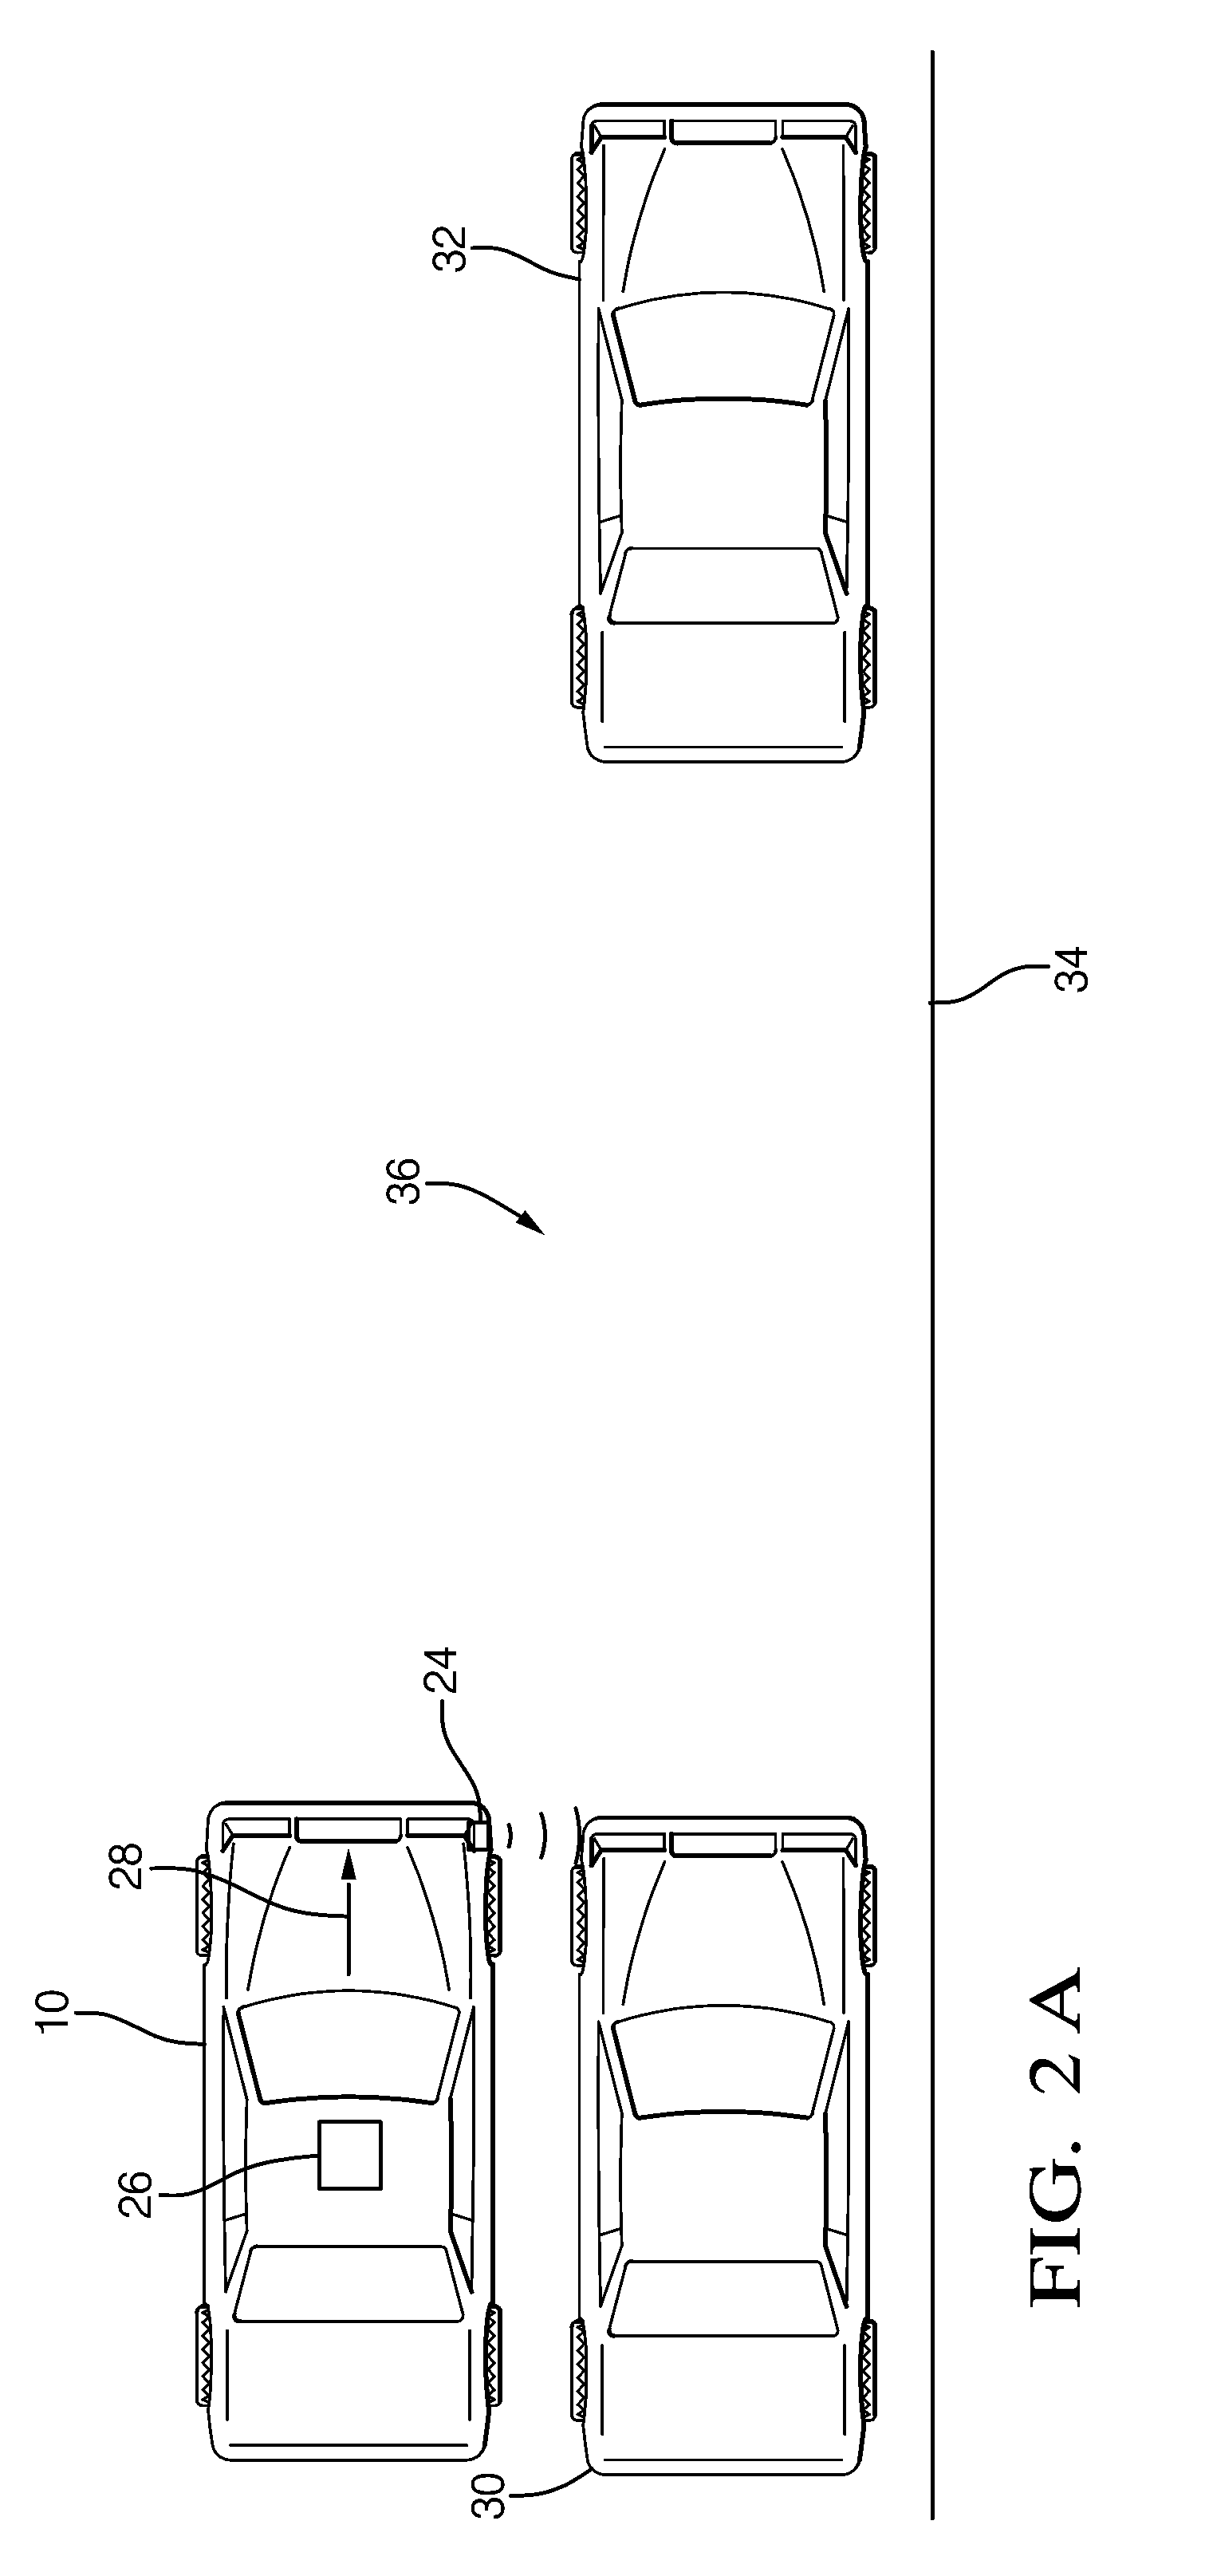 System and method for assisting a vehicle operator to parallel park a vehicle